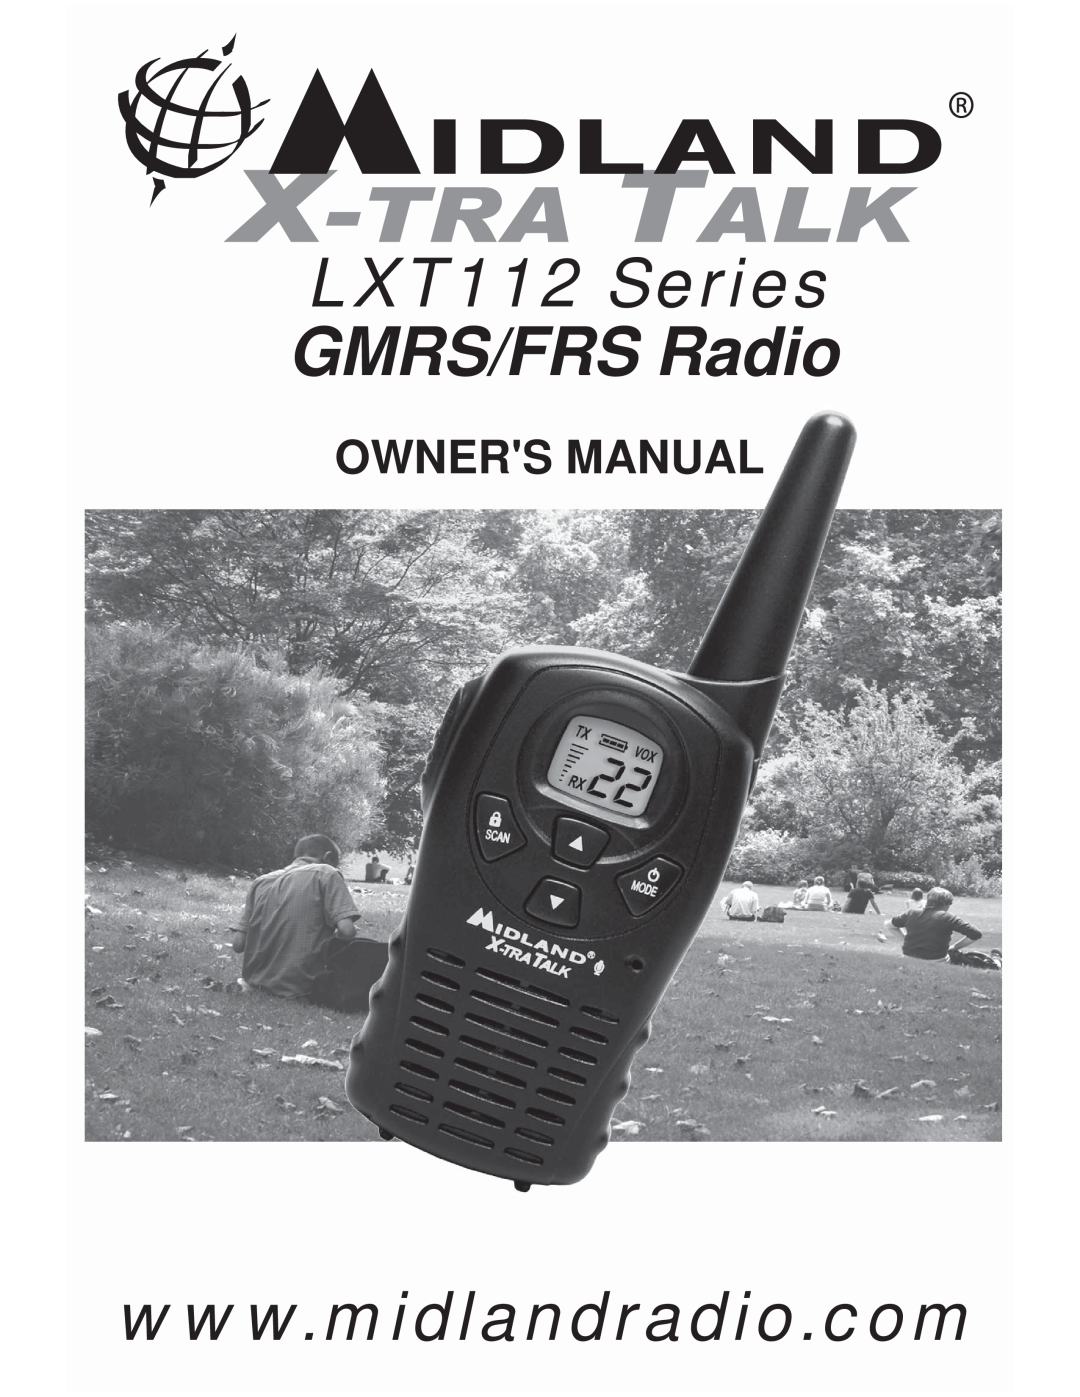 Midland Radio owner manual LXT112 Series GMRS/FRS Radio, Owners Manual 